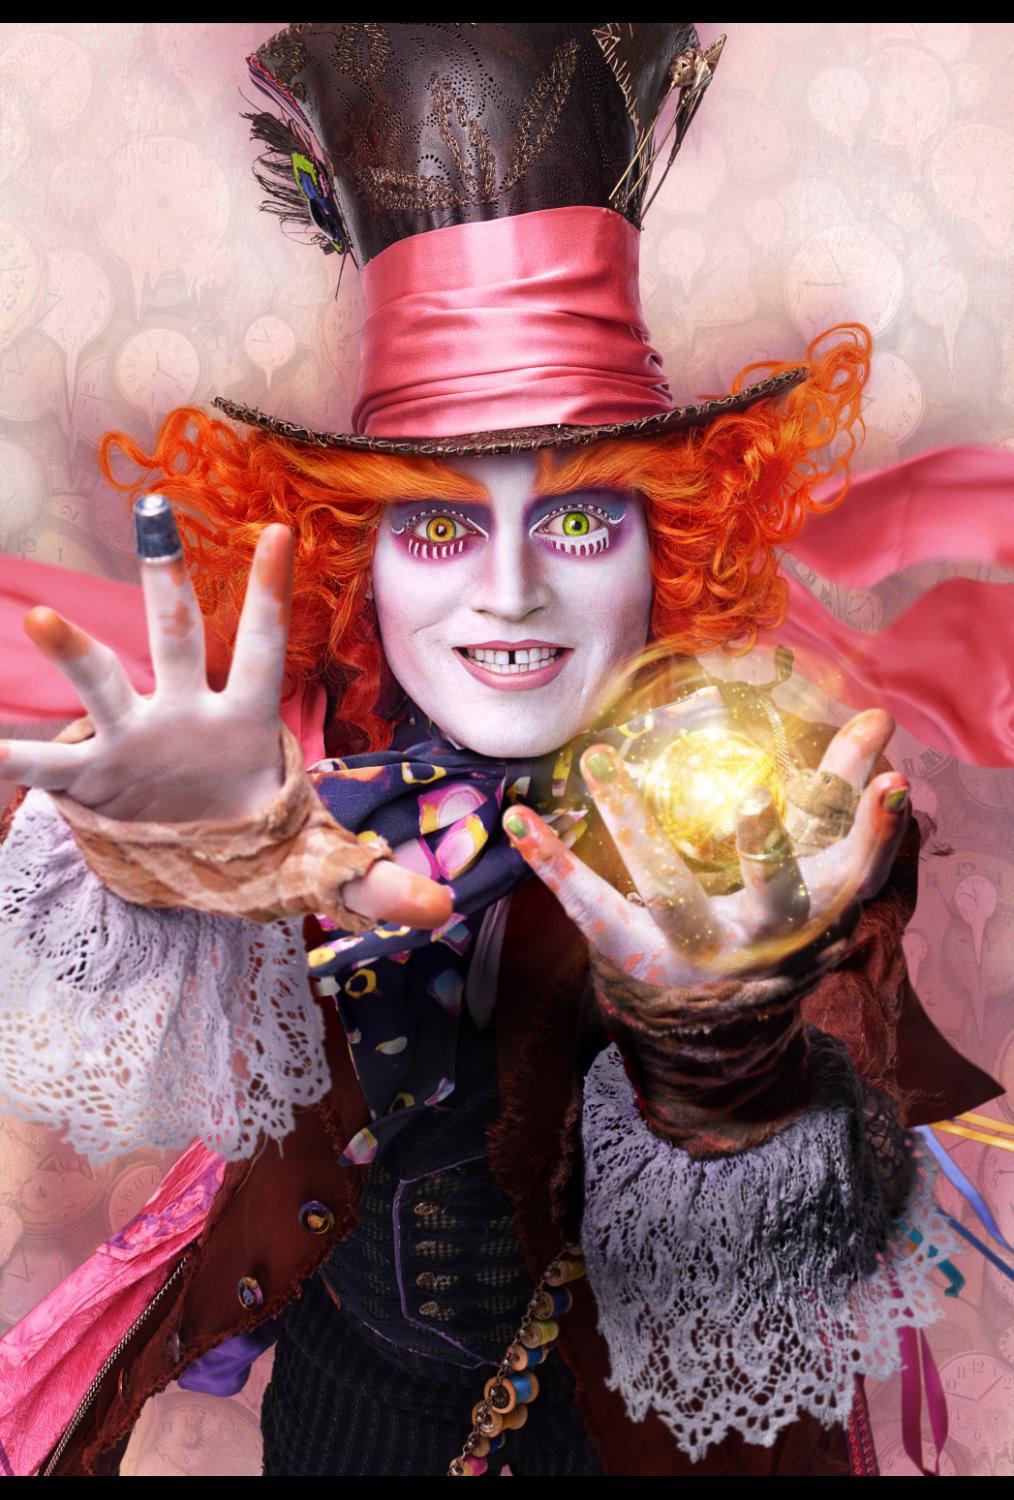 The Mad Hatter character poster